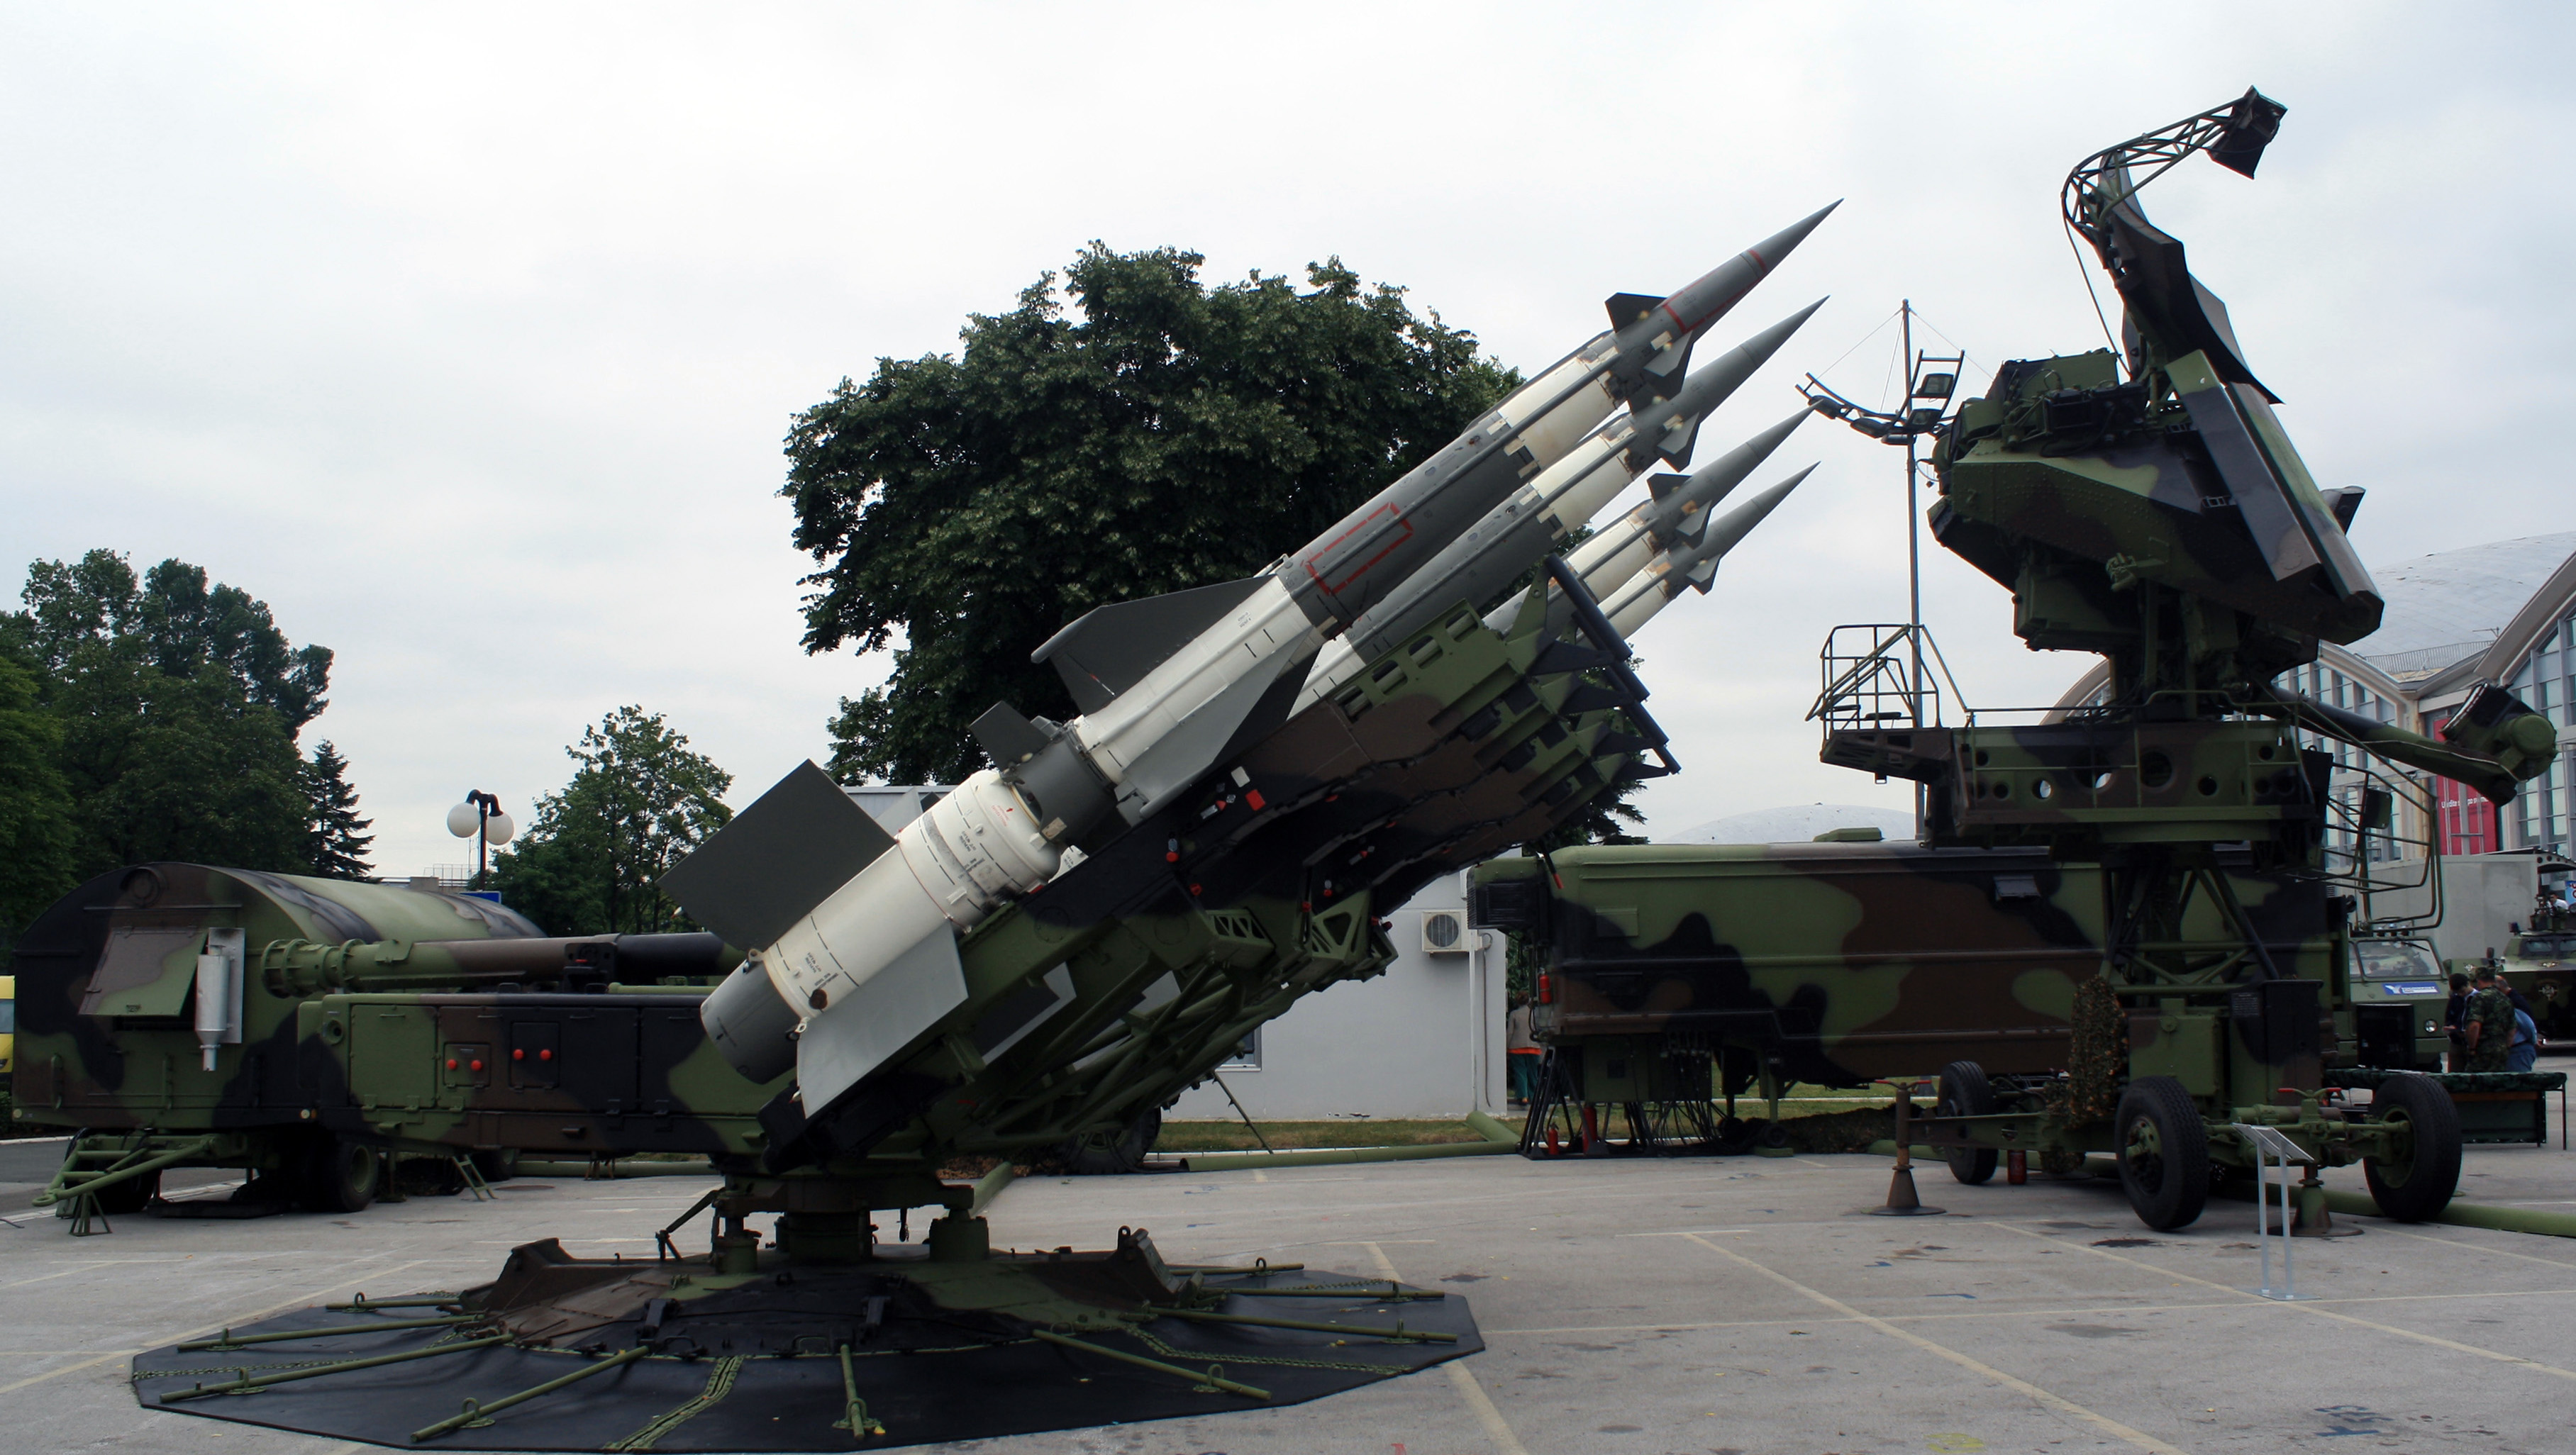 missile system, military, s 125 missile system, s 125